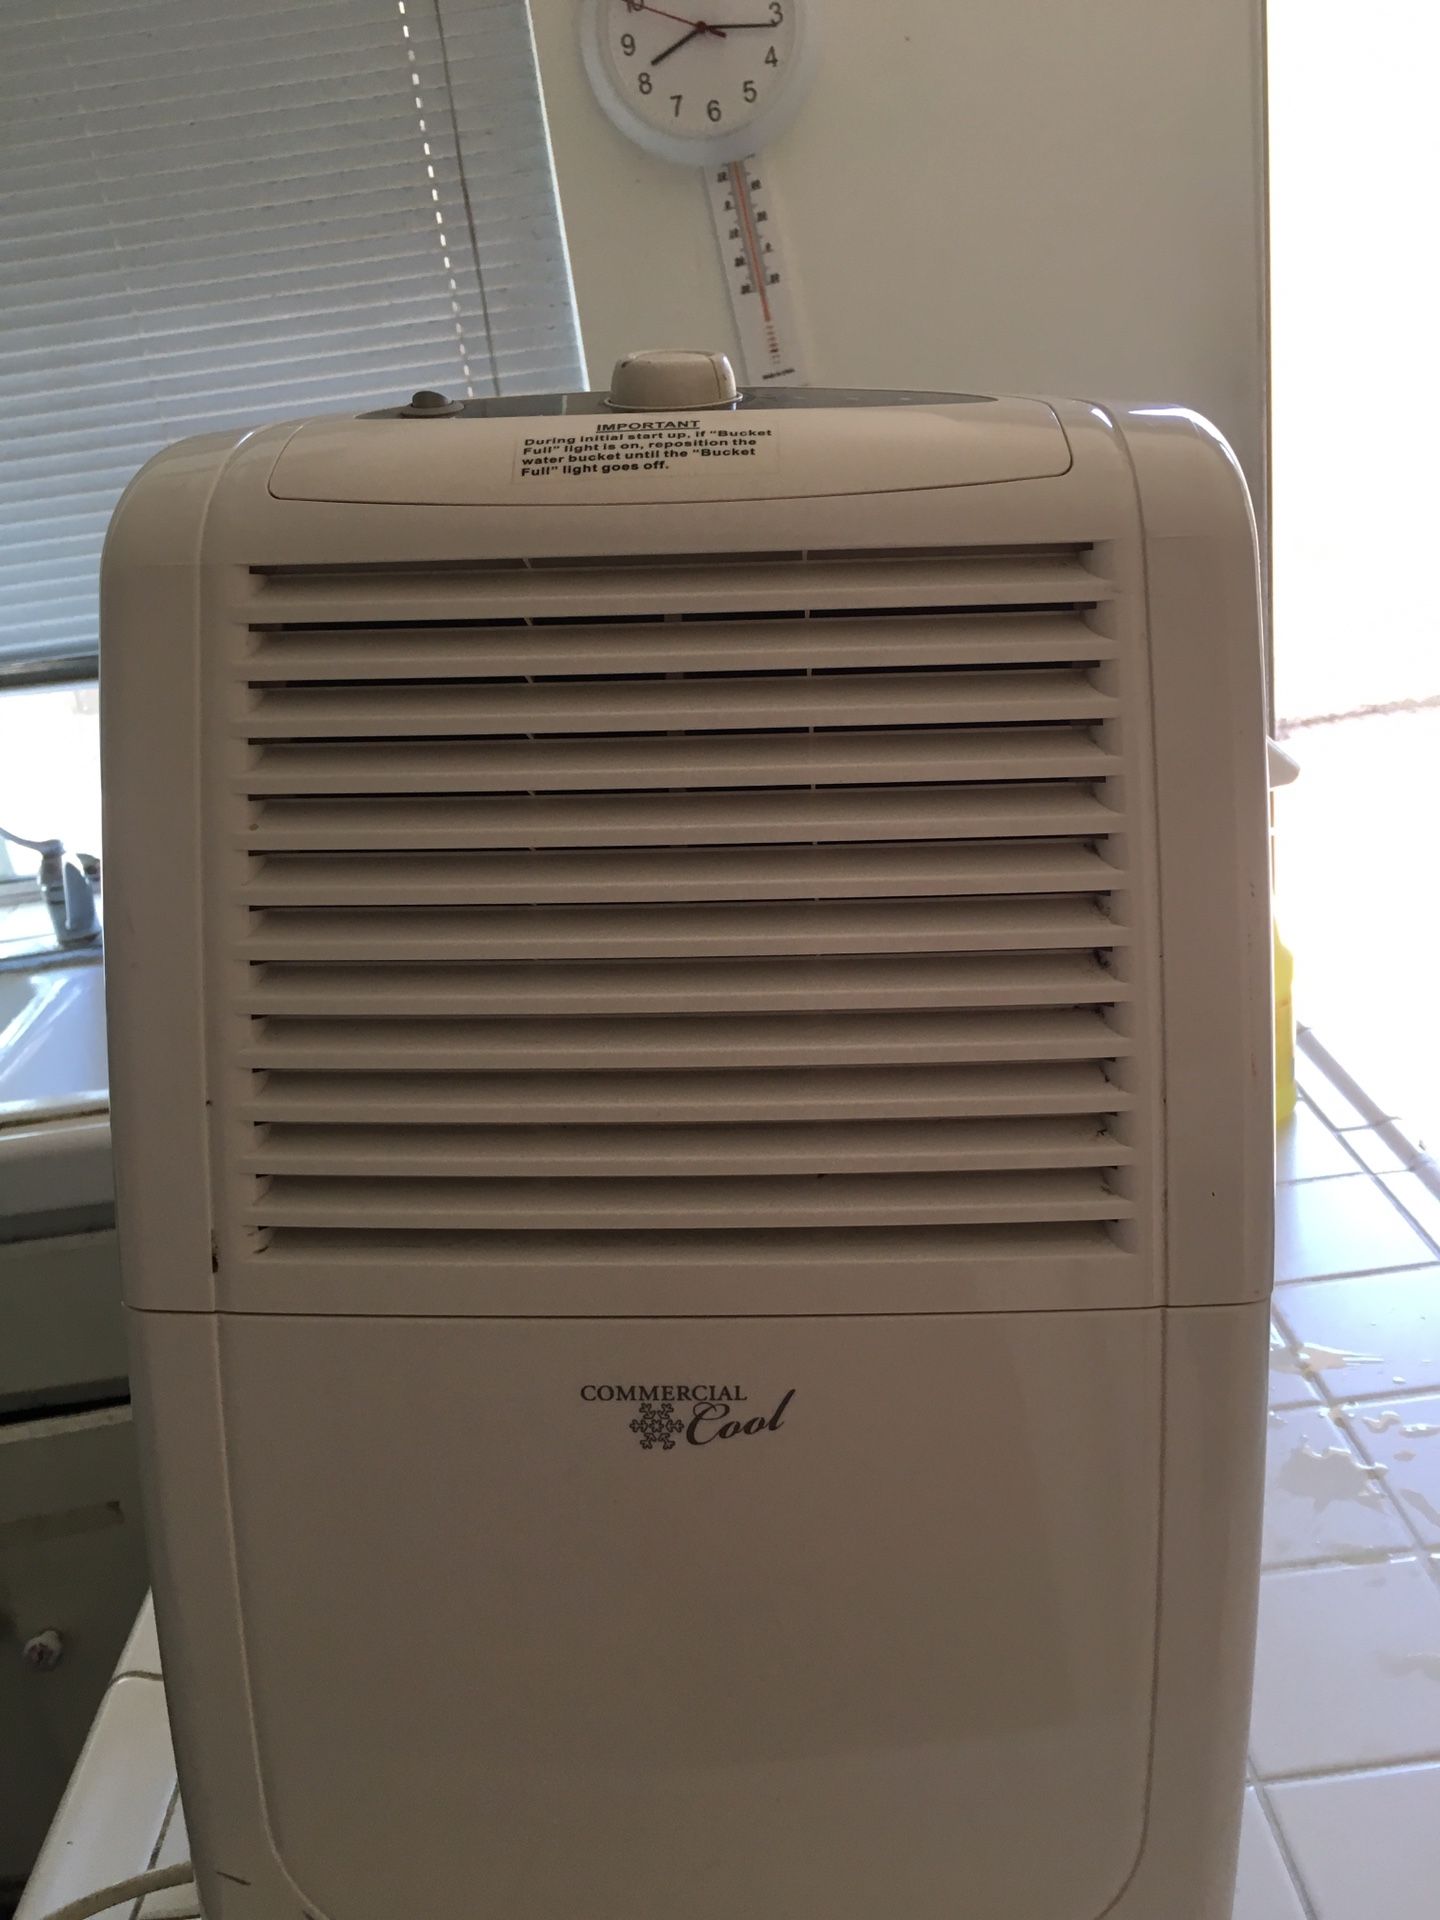 Commercial cool dehumidifier